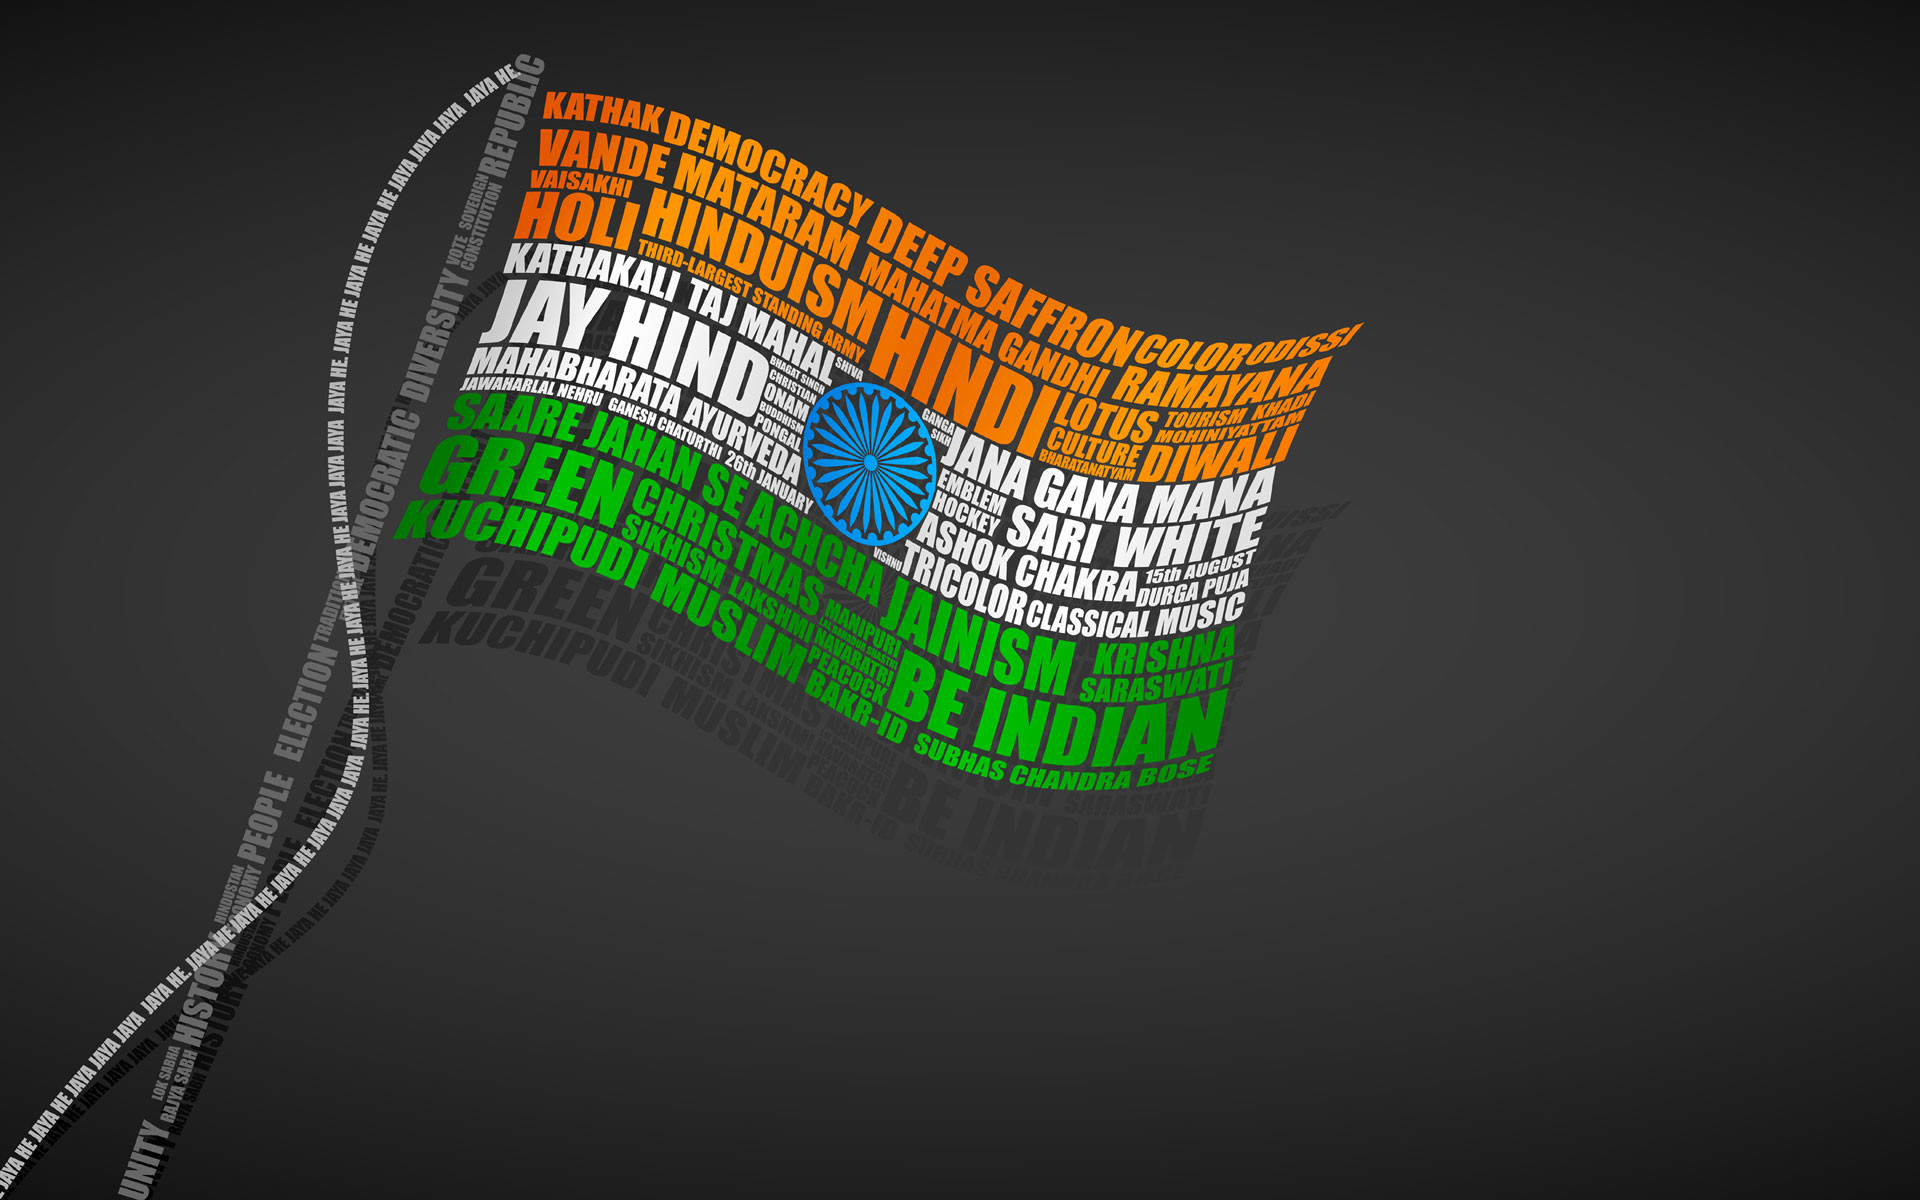 1920x1200 animation backgrounds Video background with Indian flag Animated | Images  Wallpapers | Pinterest | Indian flag, Animation background and Animation